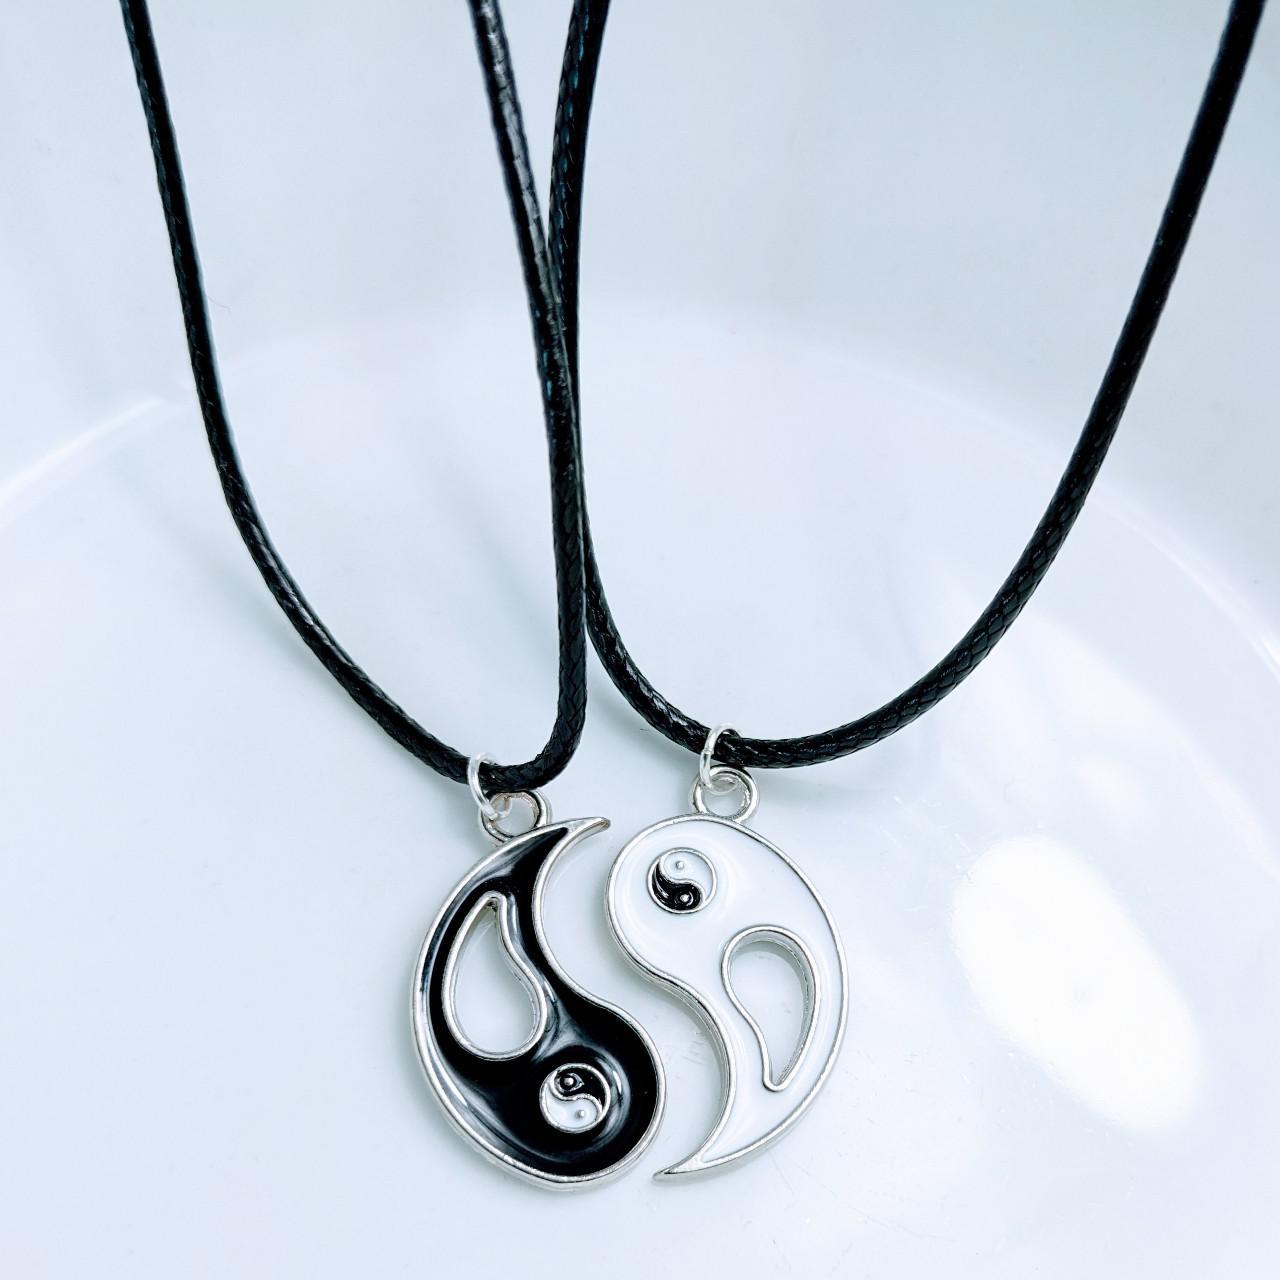 Product Image 1 - Double Yin Yang Necklace. 
This